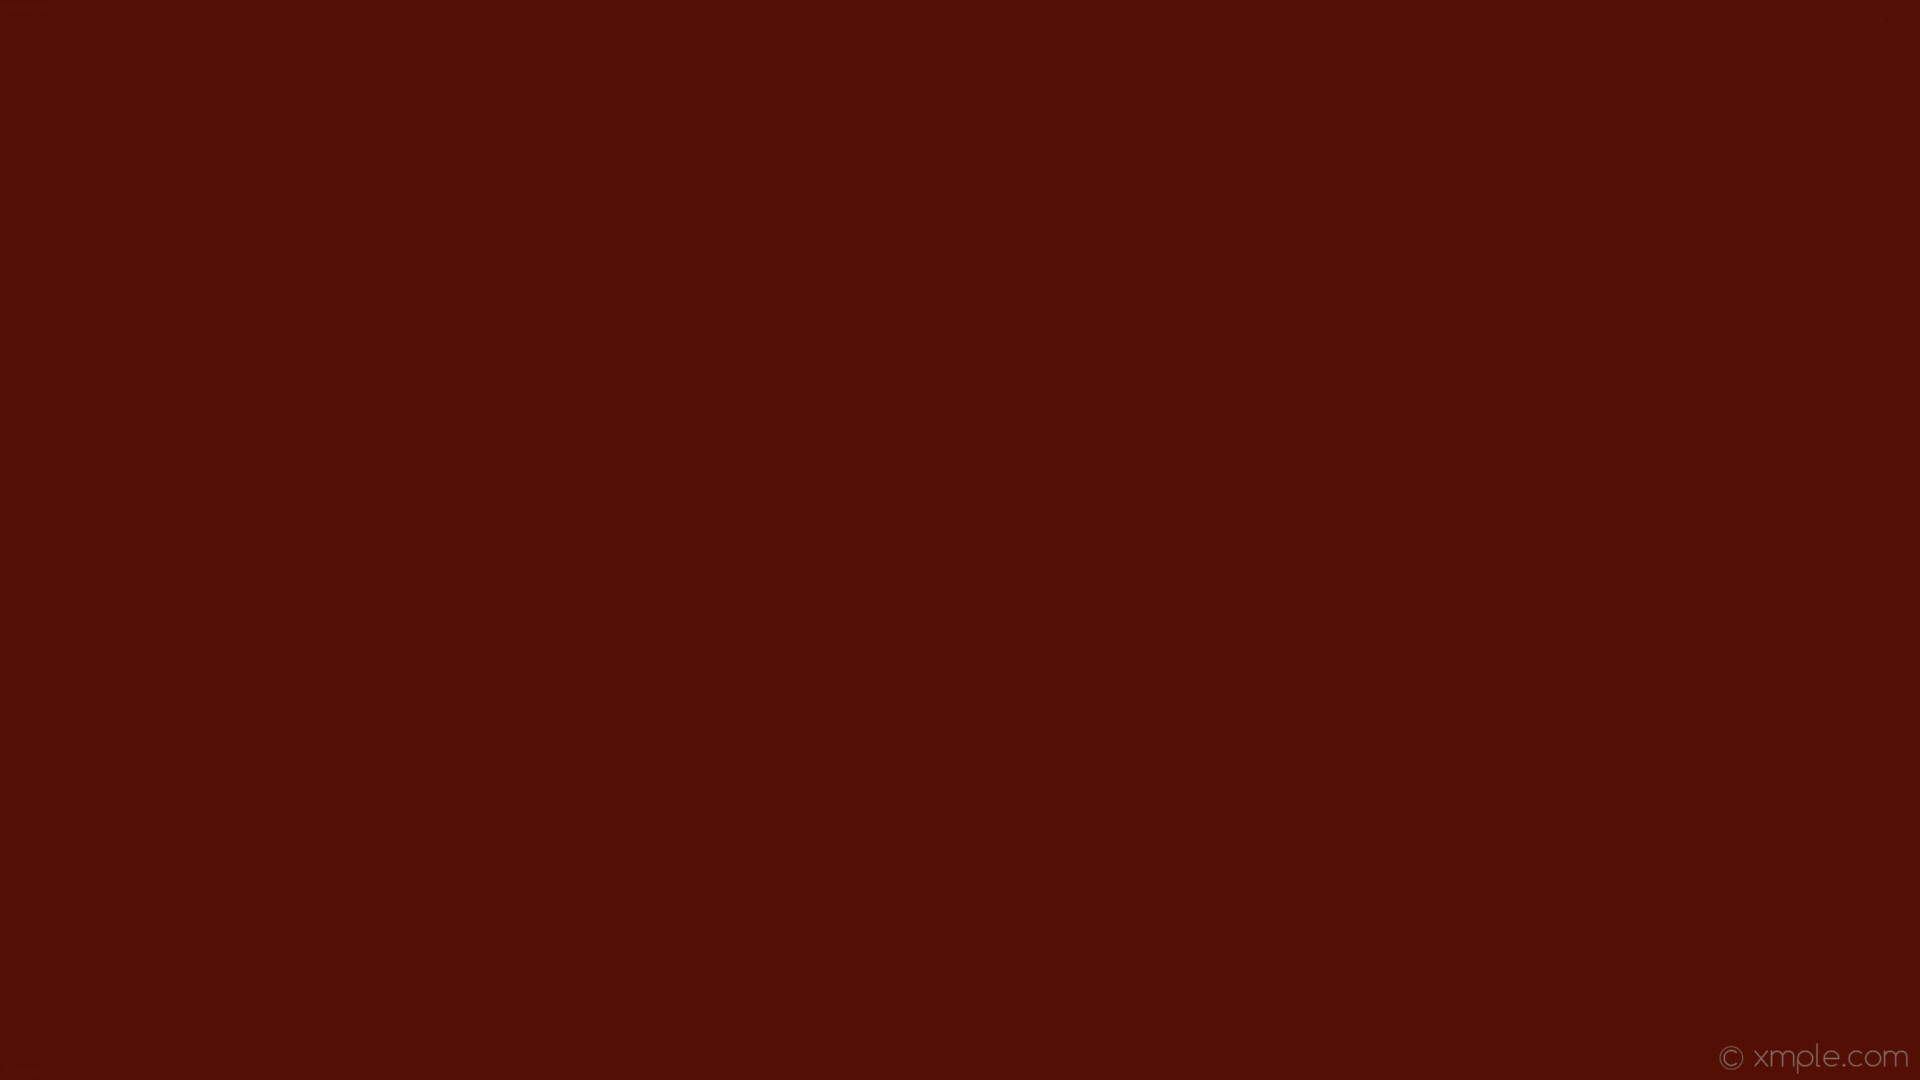 Wallpaper solid color one colour plain single red dark red